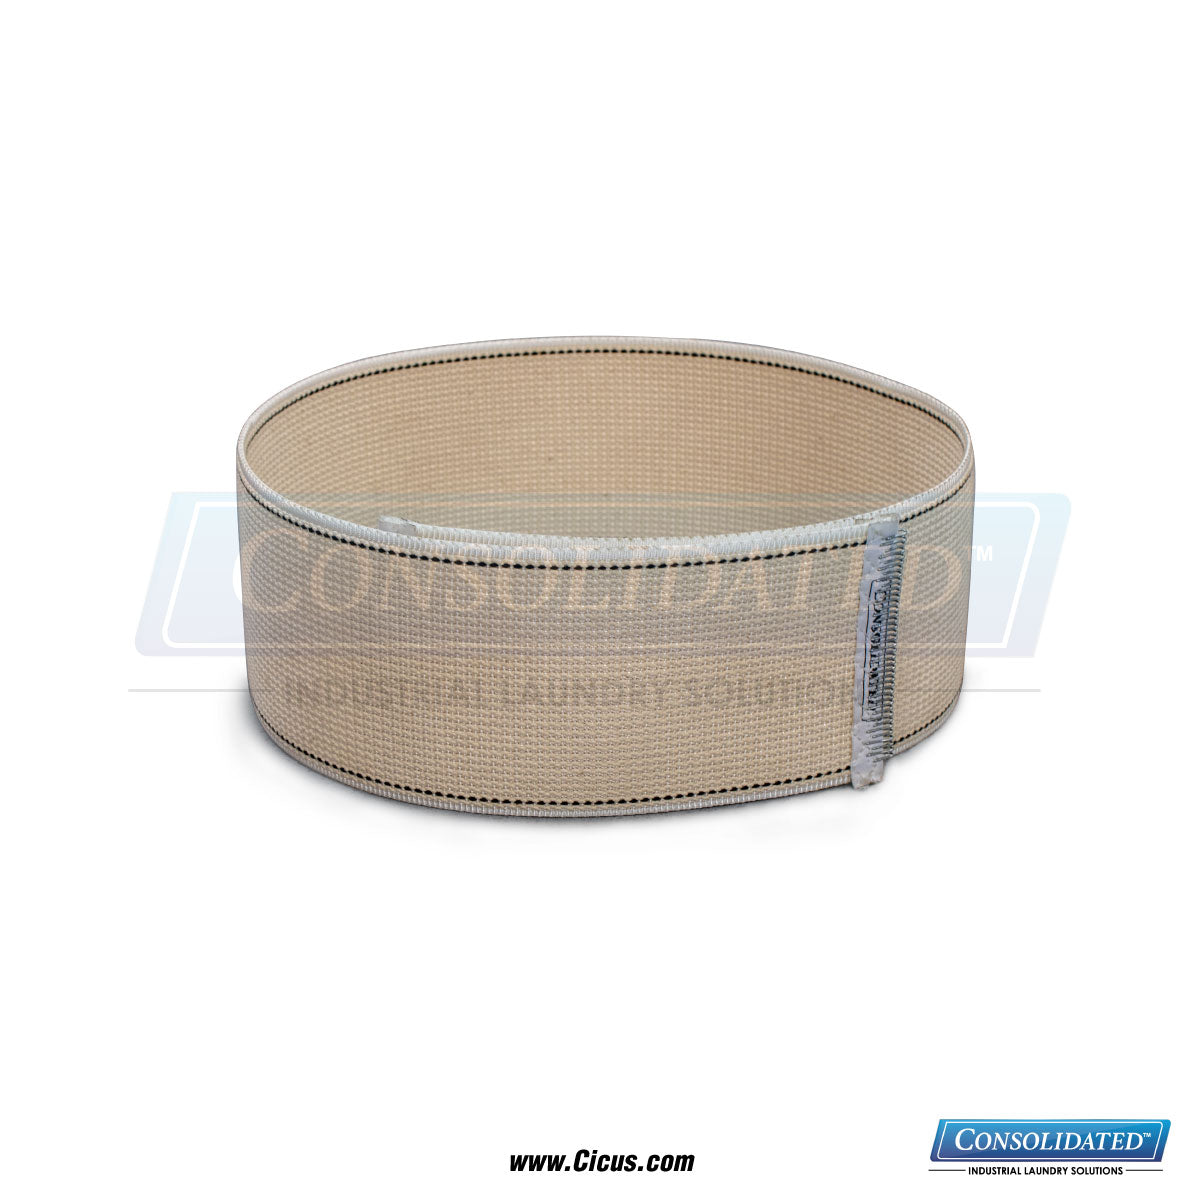 CIC Exclusive Chicago Dryer Canvas Ribbon - 2" x 112" (1001-112)